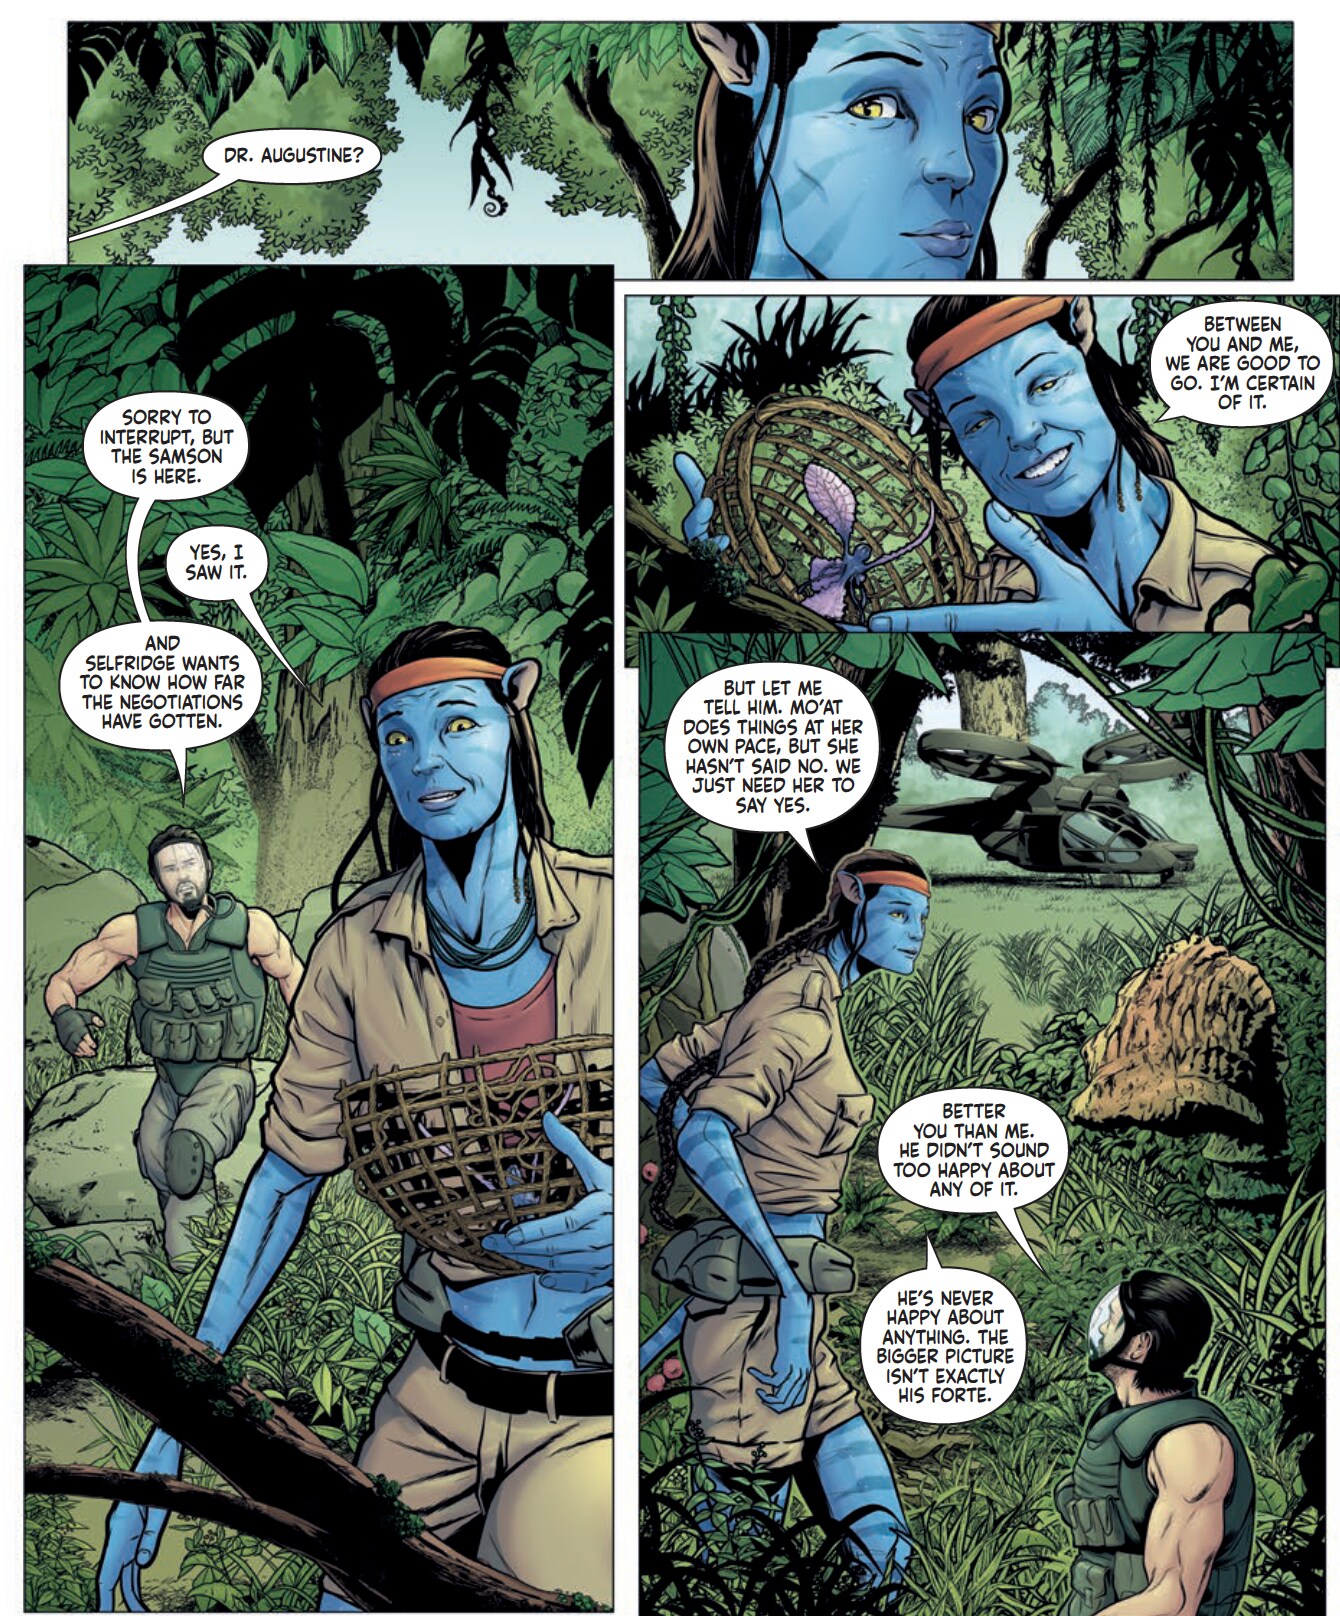 A page from a comic book featuring Na'vi walking through a forest.